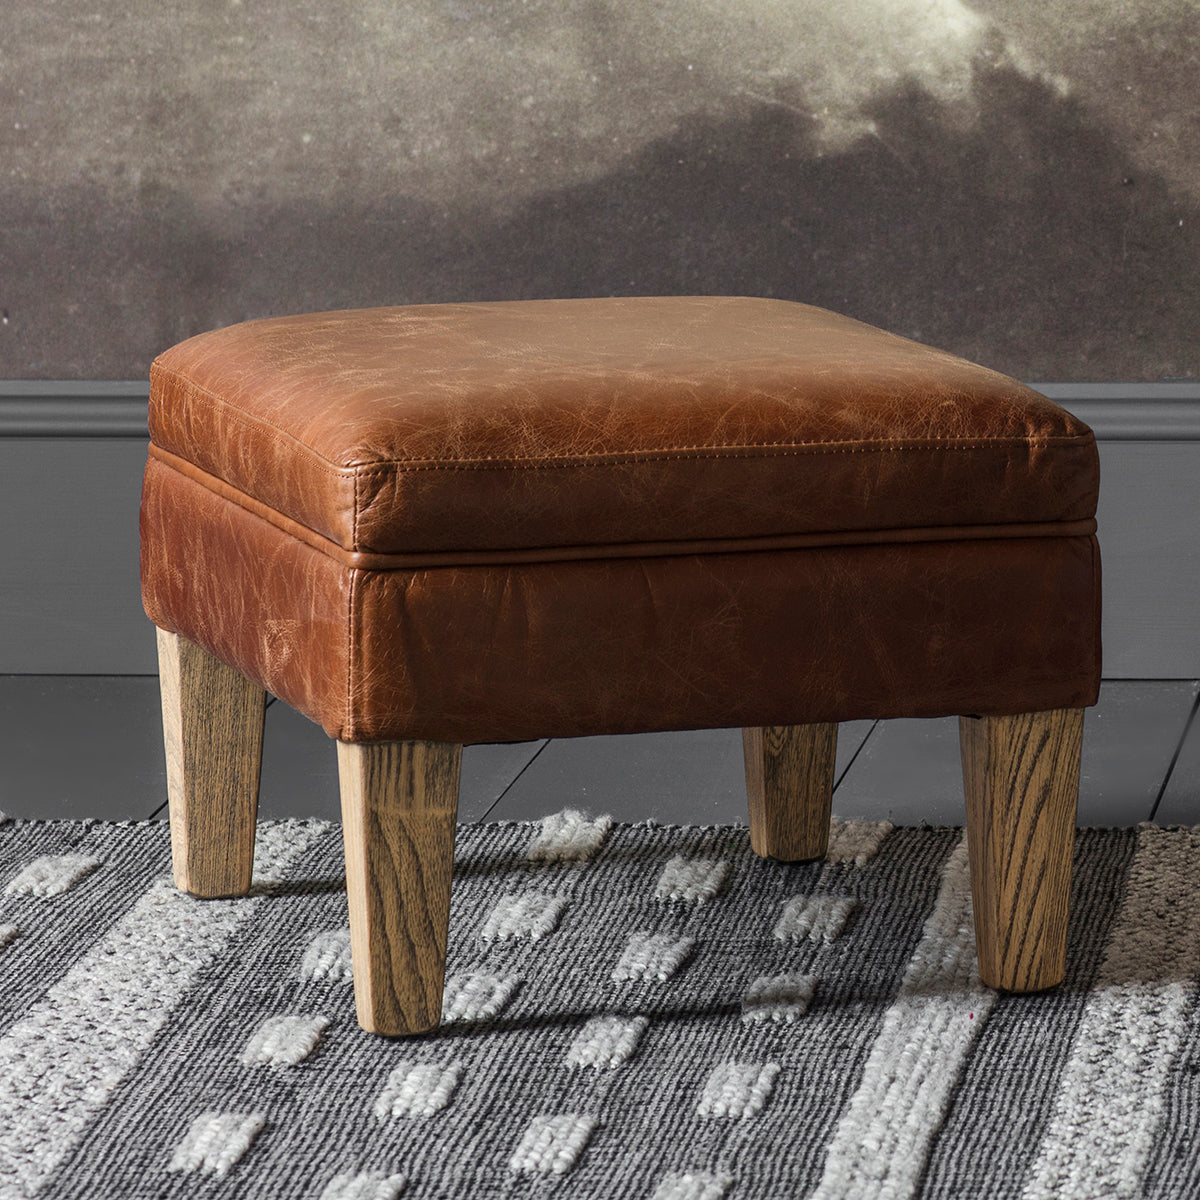 A vintage brown leather ottoman from Kikiathome.co.uk serves as an interior decor statement piece.